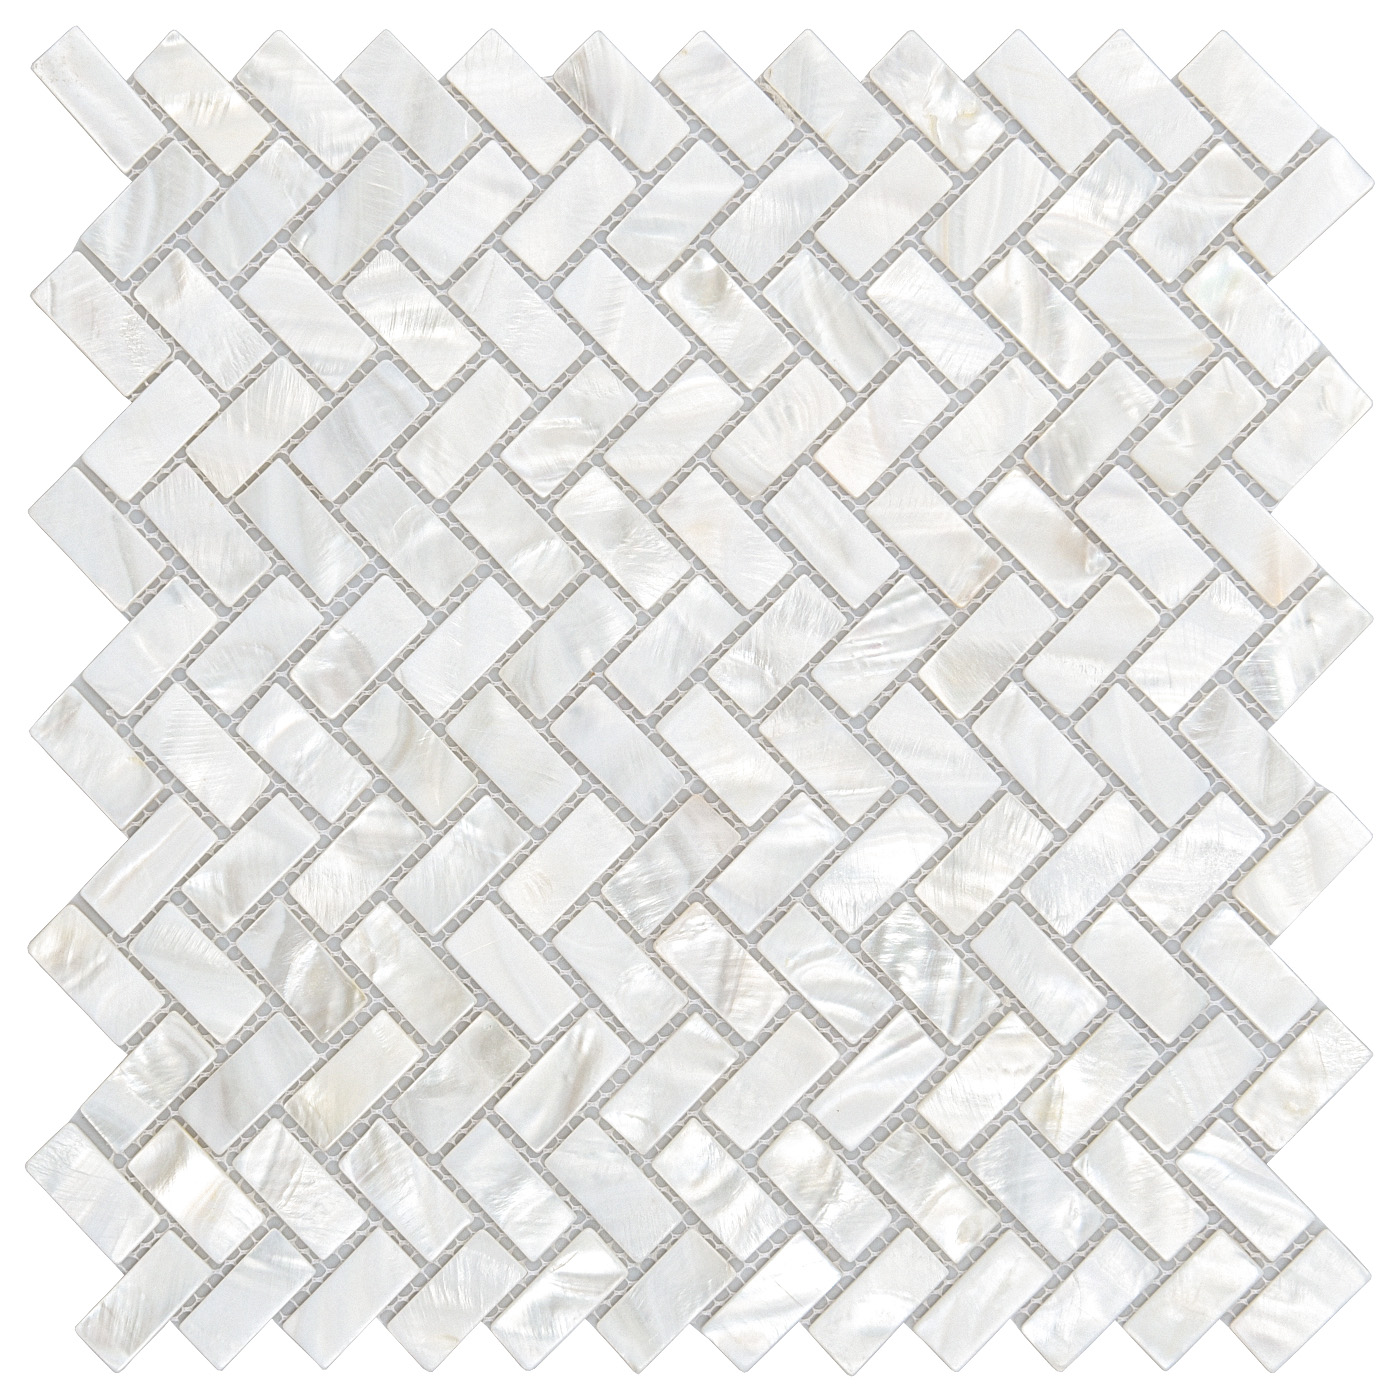 A18017 - White Mother of Pearl MOP Shell Tile for Shower Wall, 12